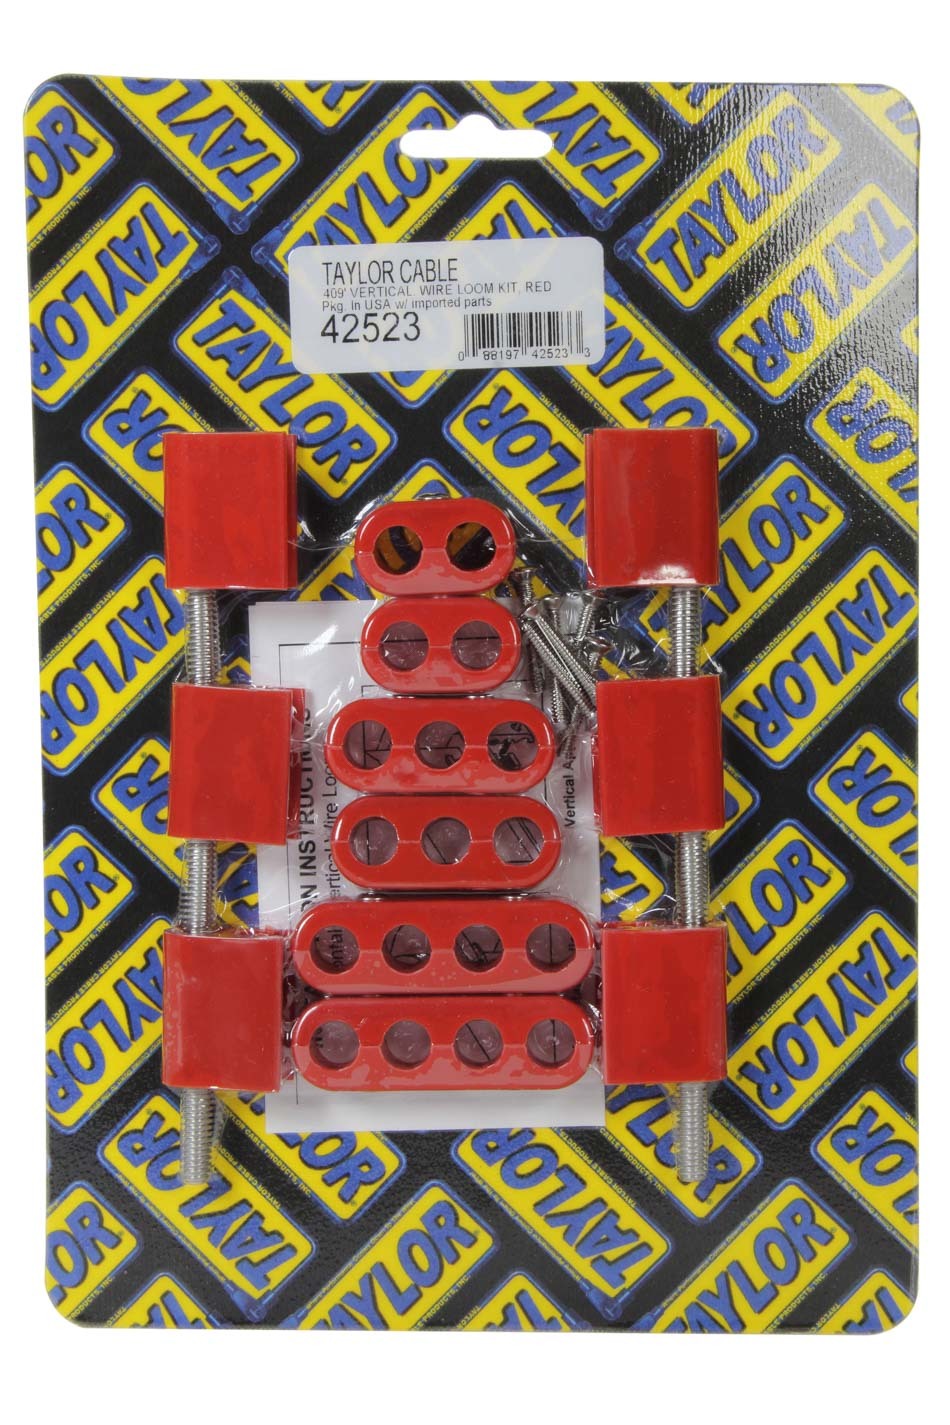 Taylor/Vertex 10.4mm Vertical Wire Loom Kit Red TAY42523